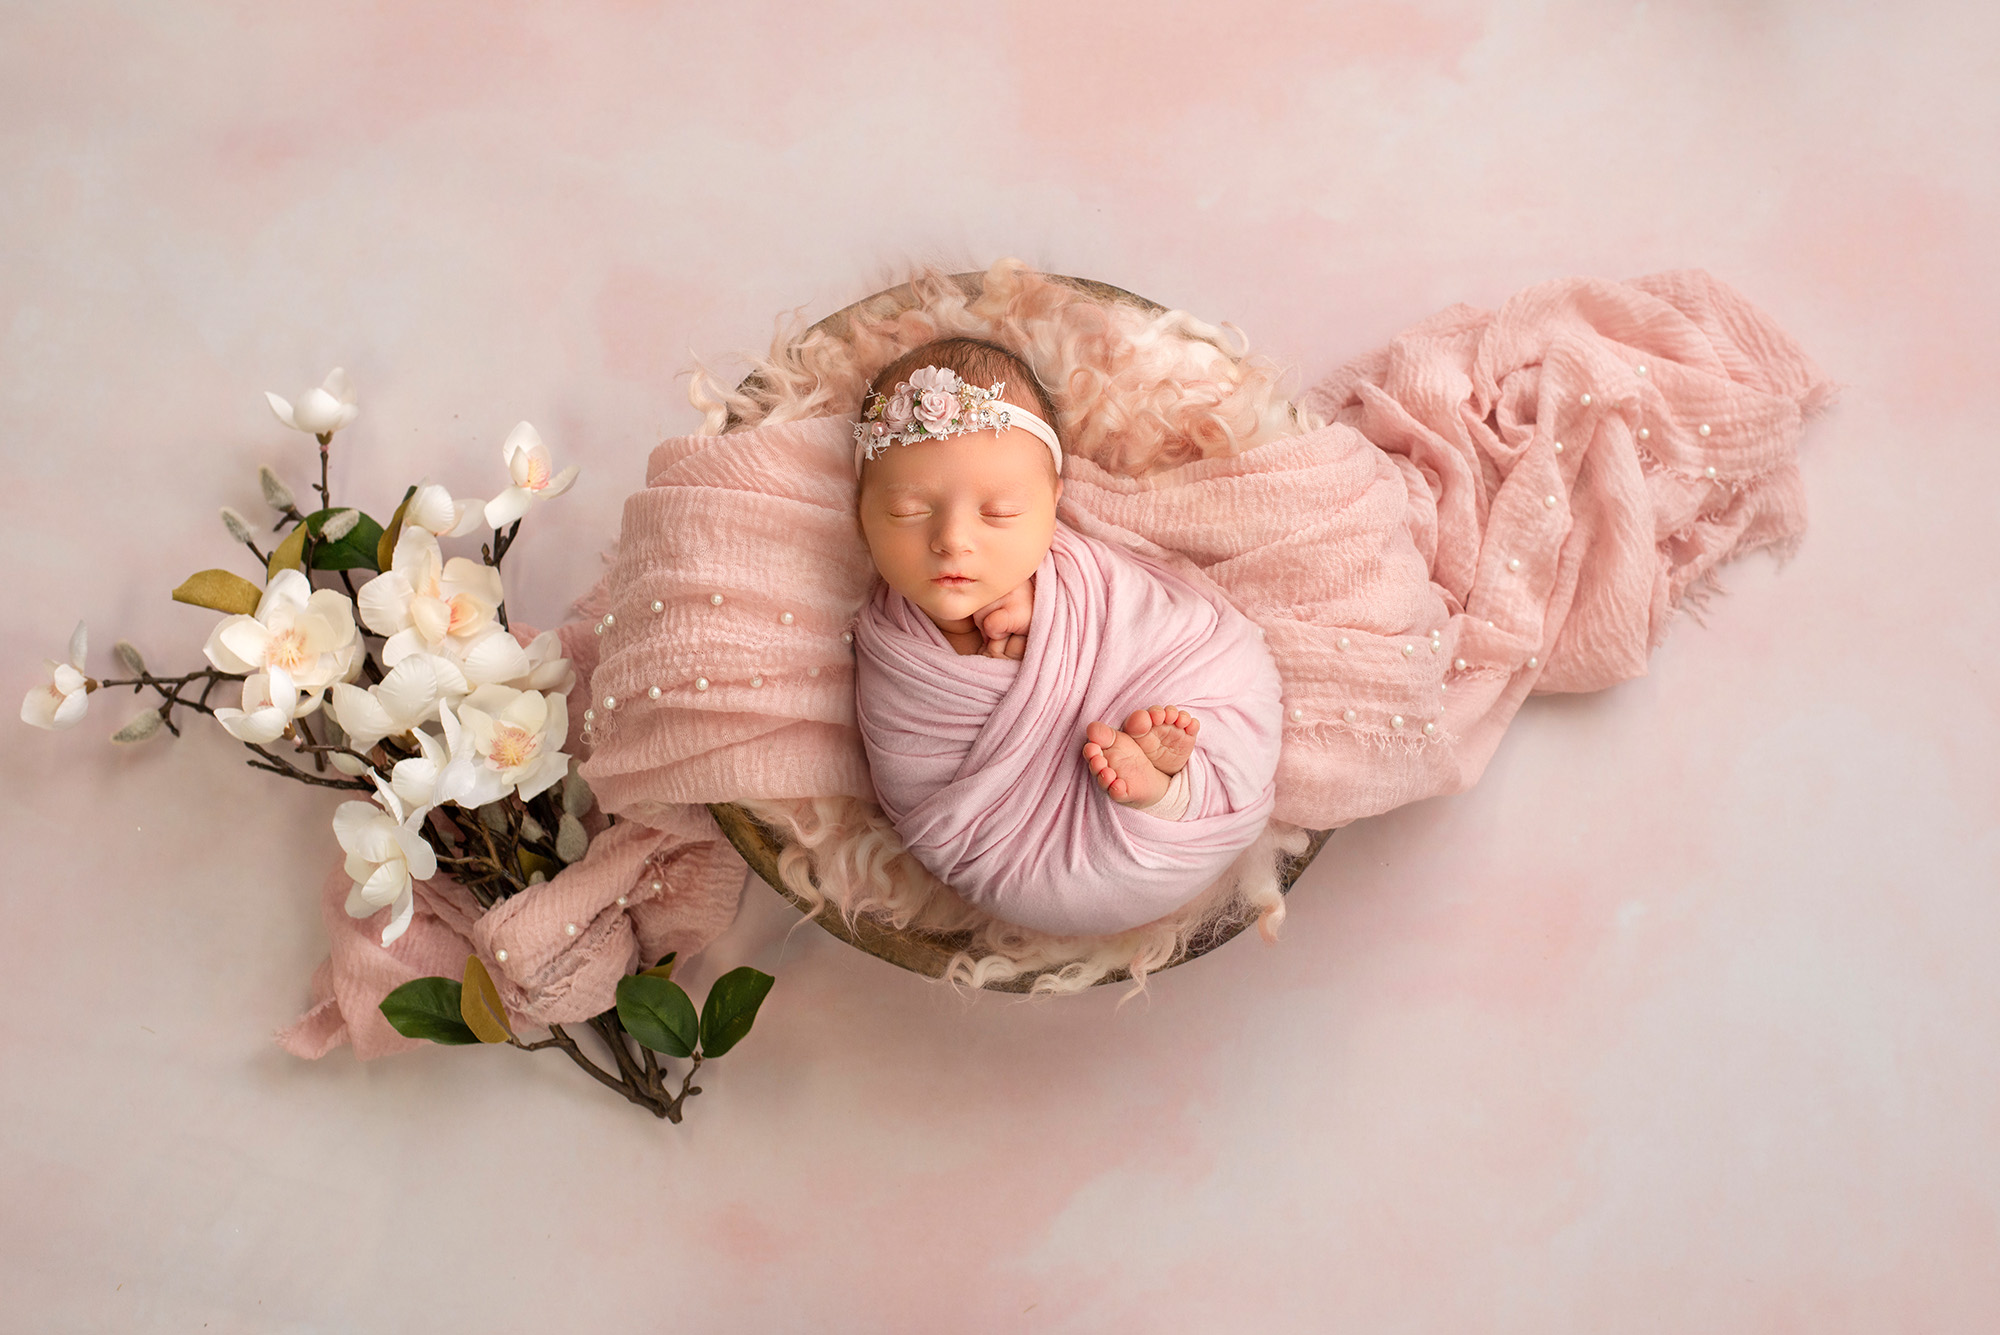 Sweet baby with tiny toes peeking out, nestled beside a bouquet of magnolias in a simple, heartwarming photograph